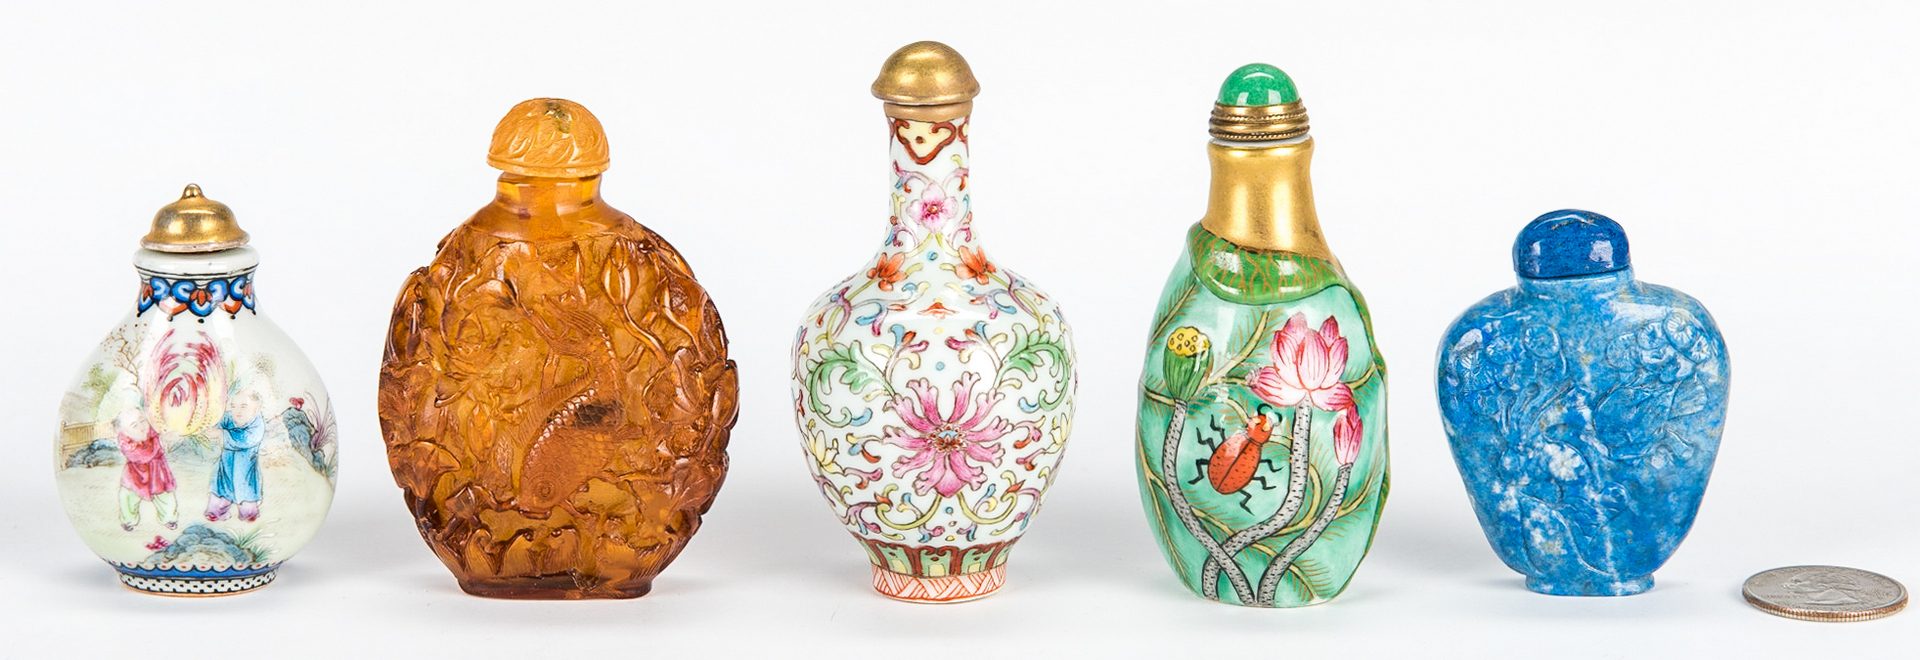 Lot 5: 5 Chinese Snuff Bottles incl. Lapis, Porcelain